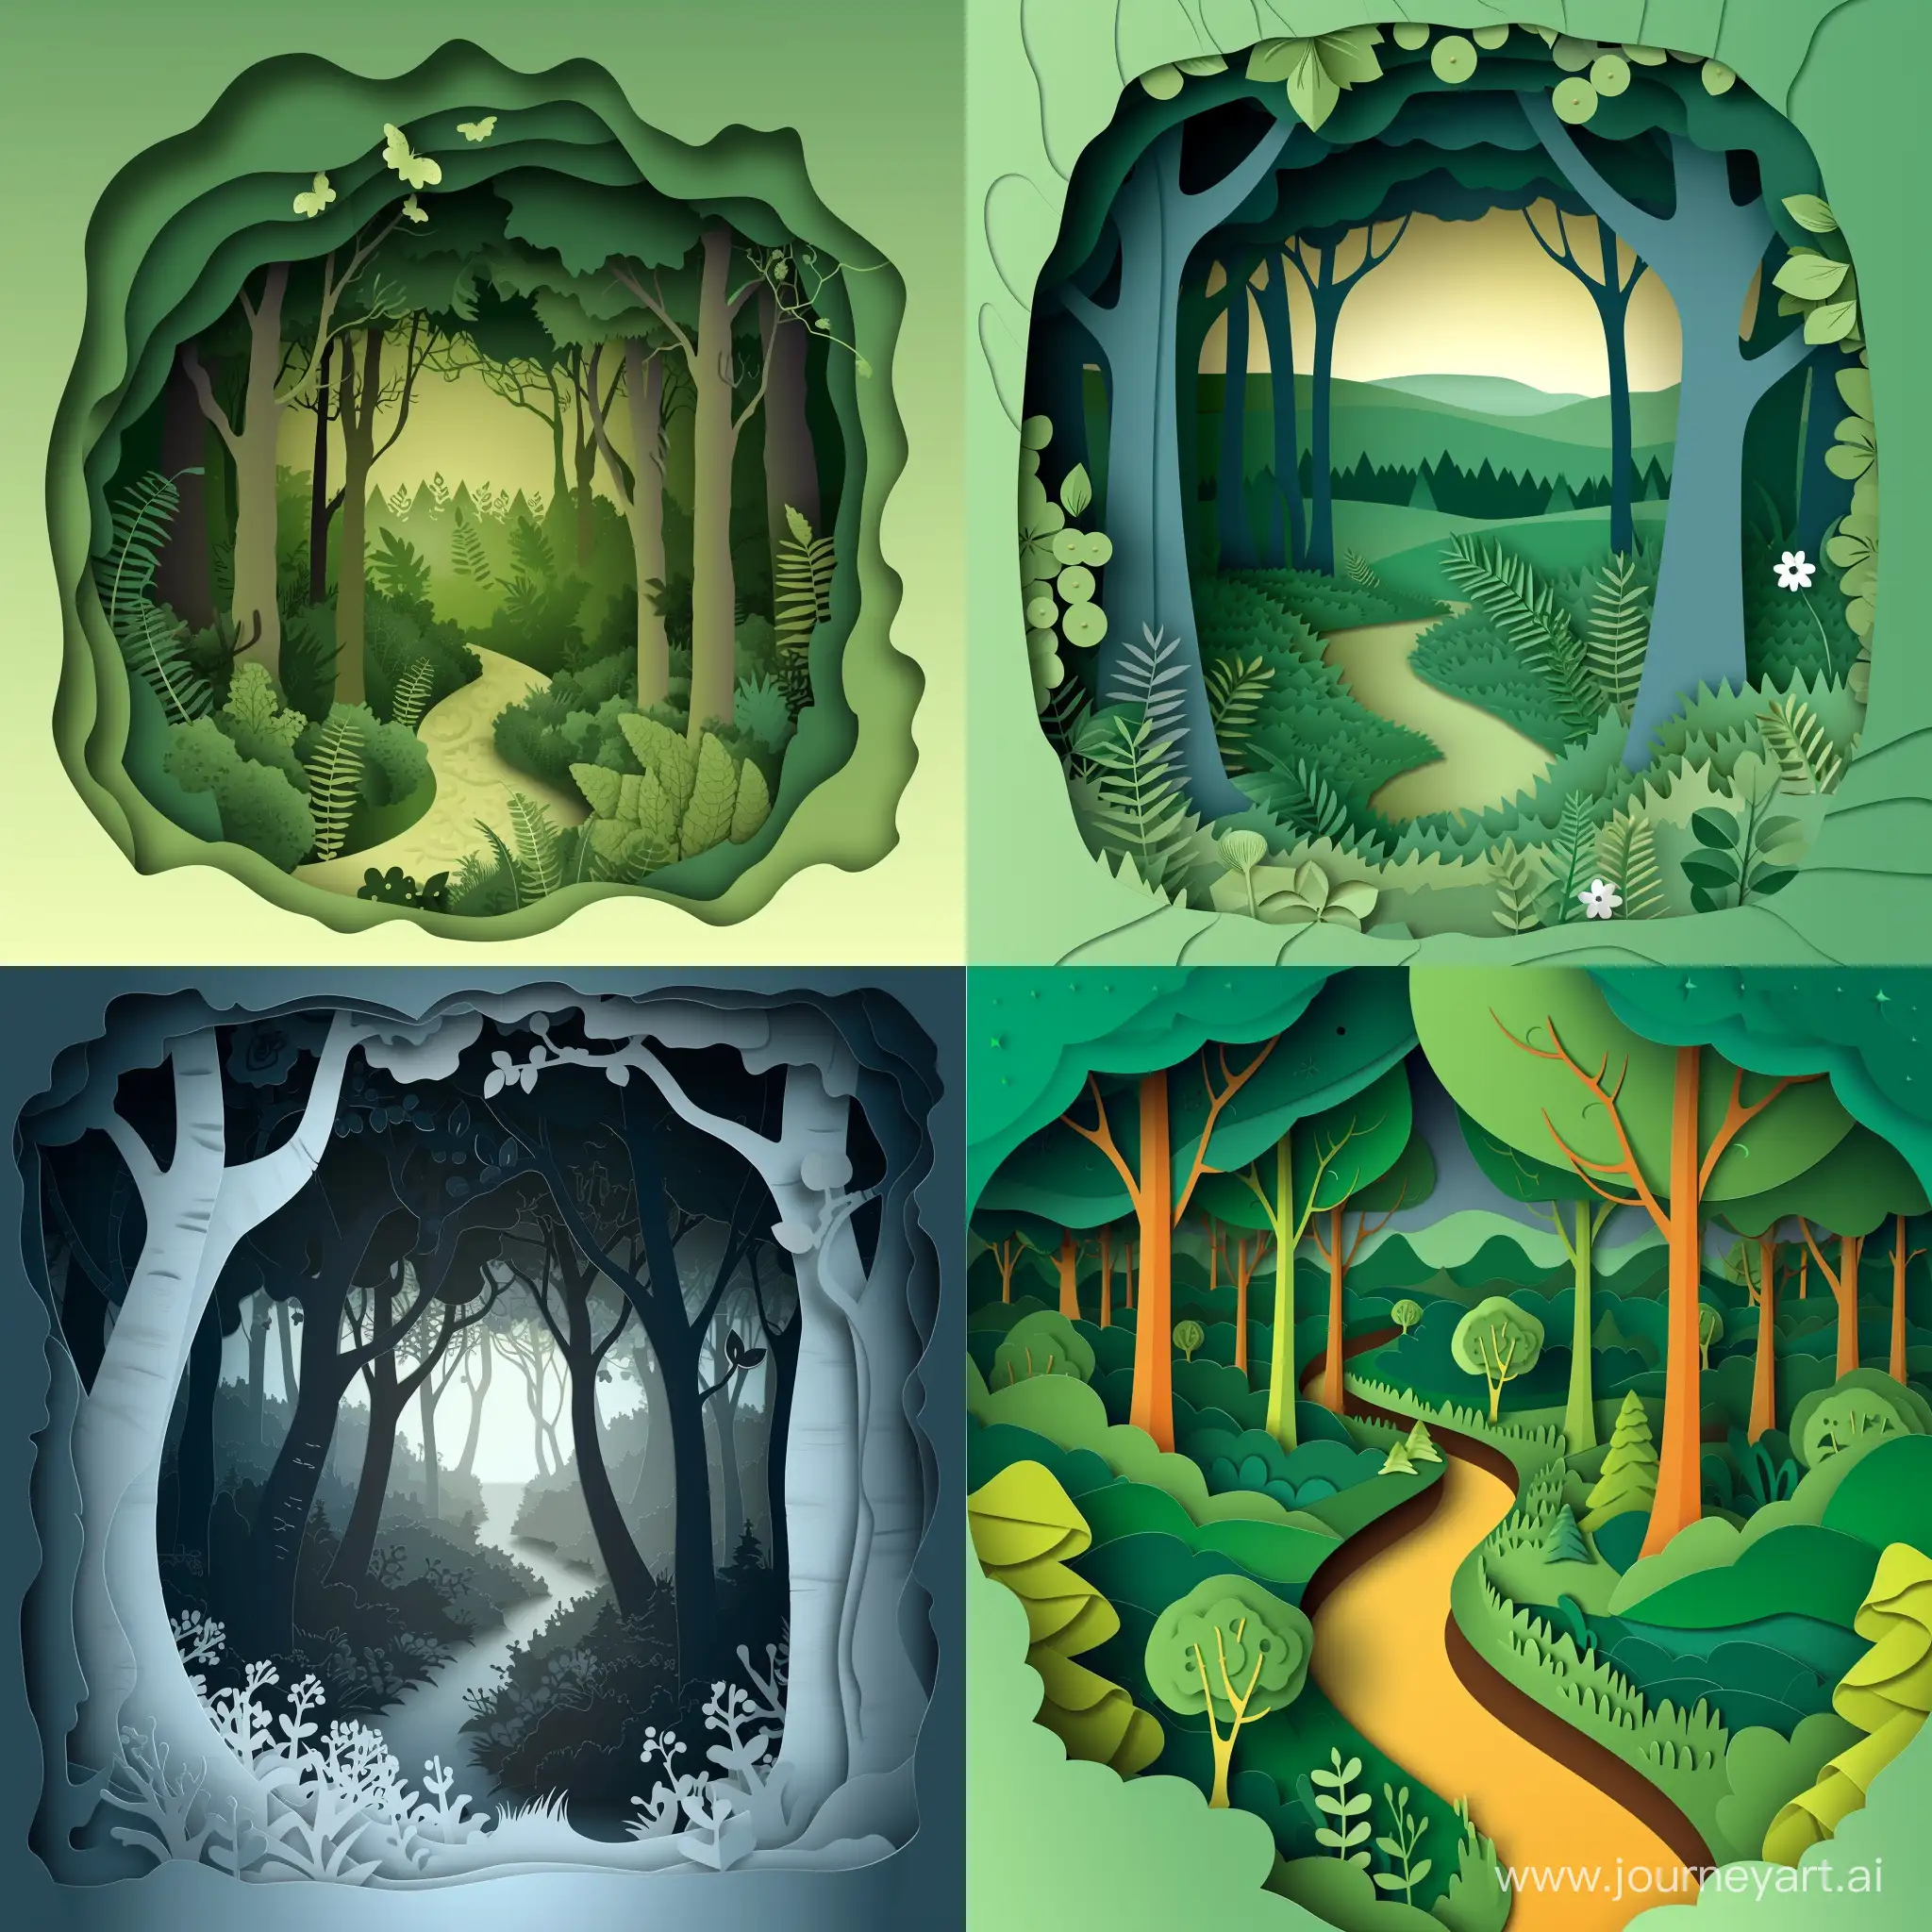 cut paper art of forest woodland fantasy landscape, in high quality vector style